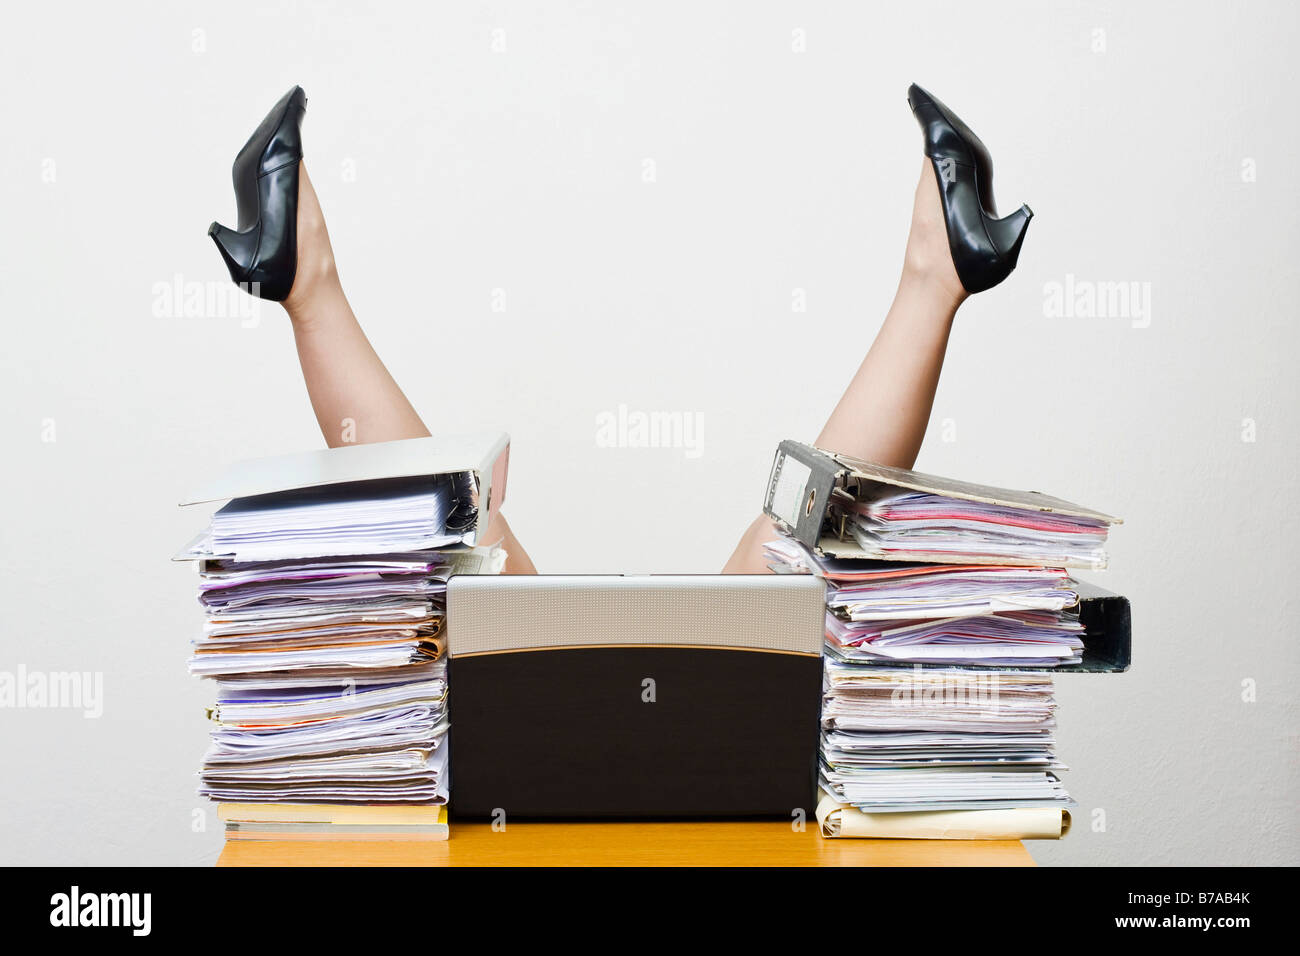 Legs of an overworked businesswoman sticking up in the air behind a desk loaded with files Stock Photo